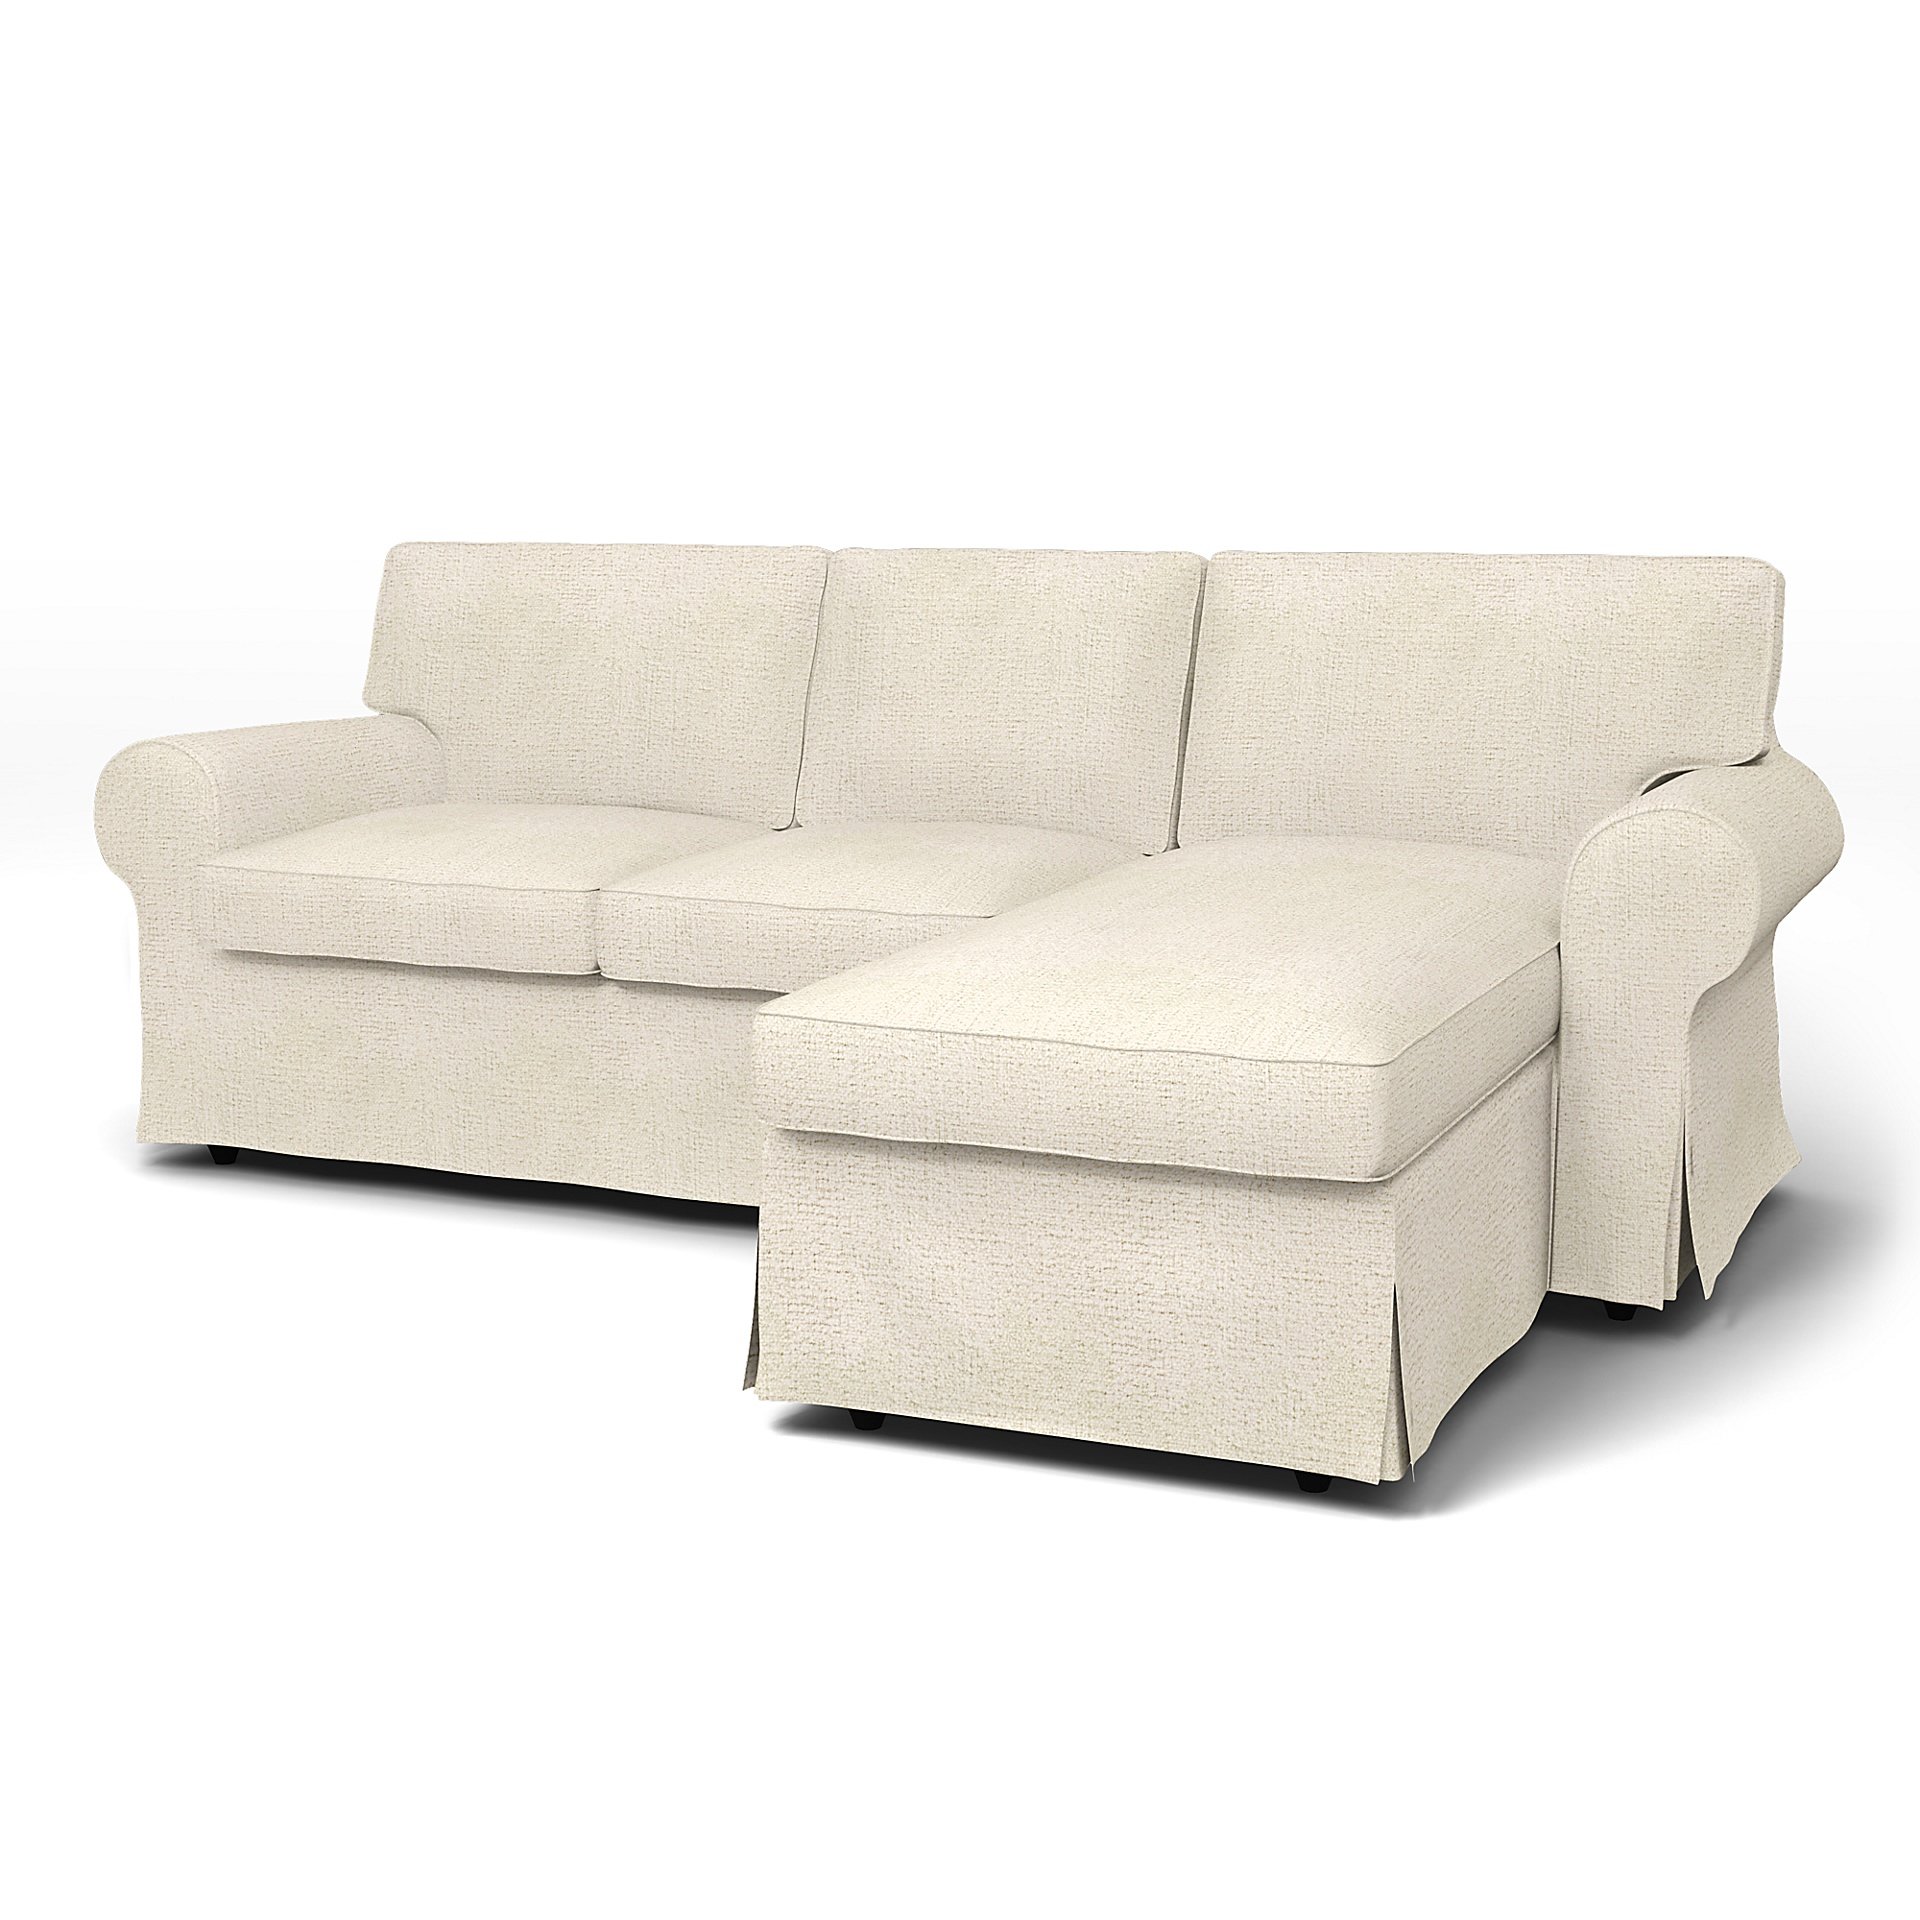 IKEA - Ektorp 3 Seater Sofa with Chaise Cover, Ecru, Boucle & Texture - Bemz